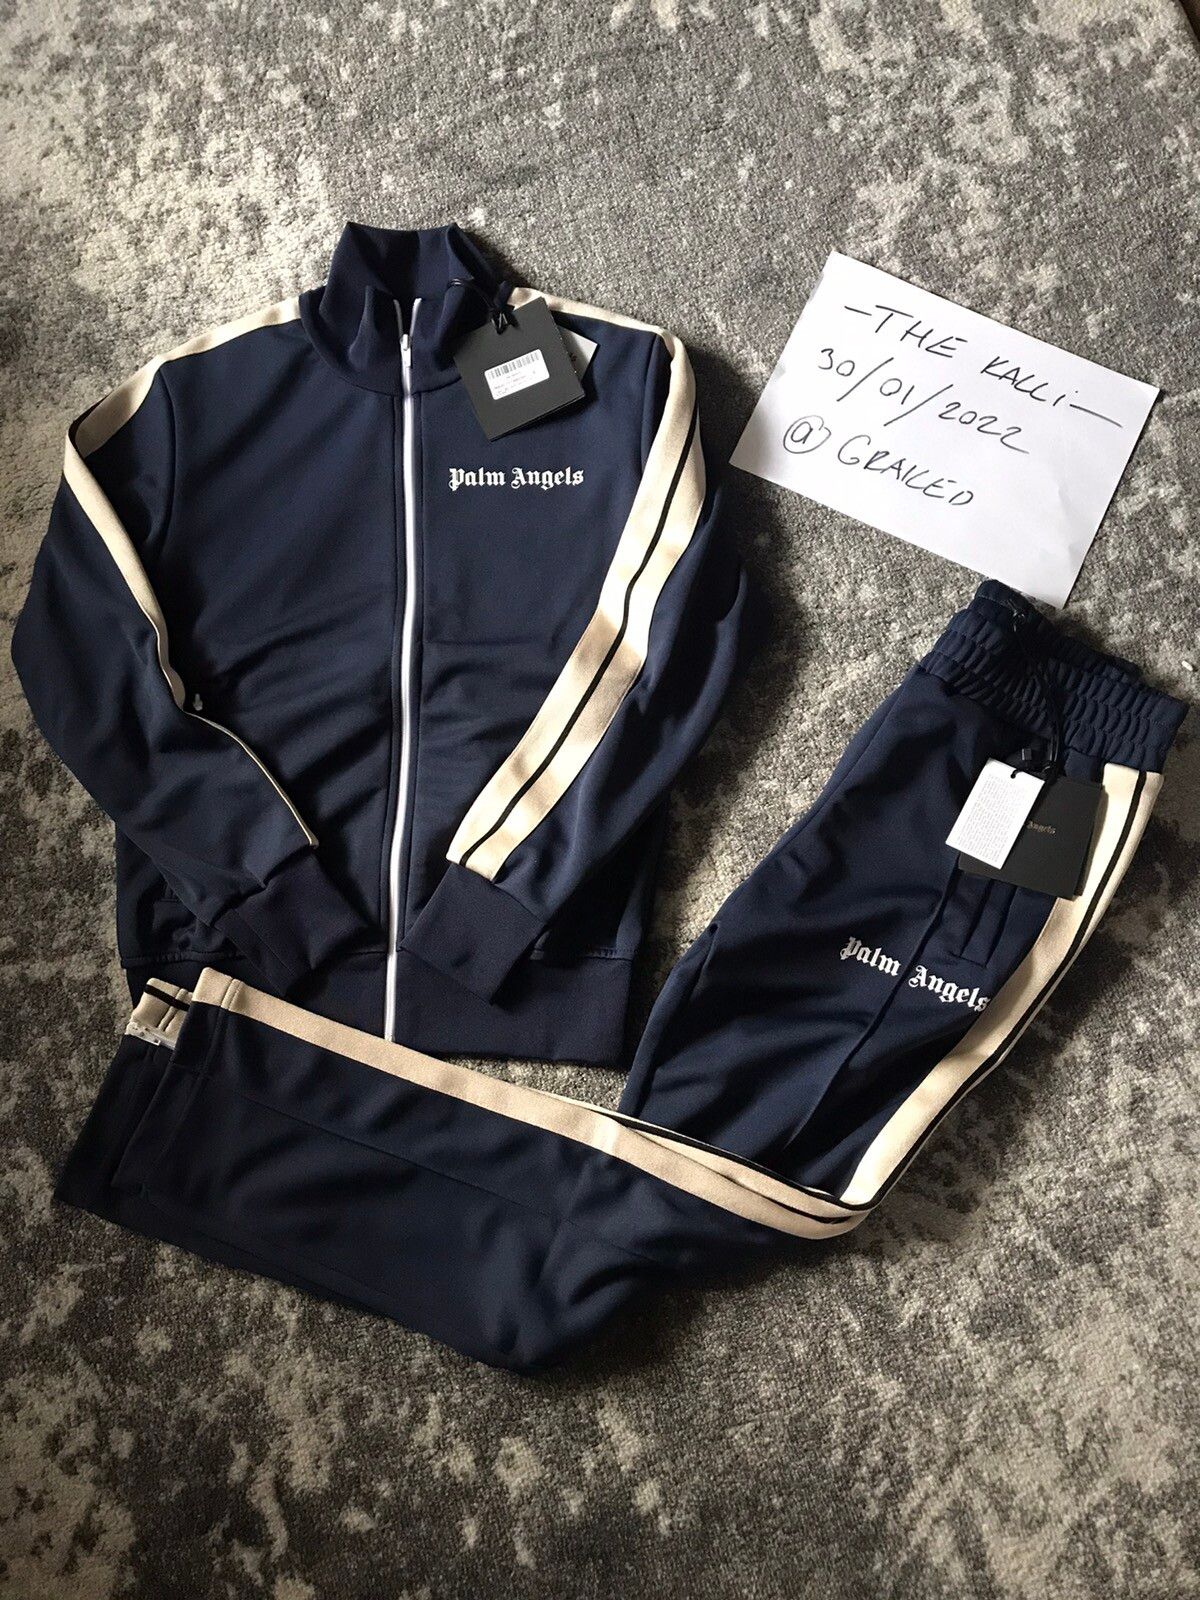 palm angels tracksuit Top And Bottom